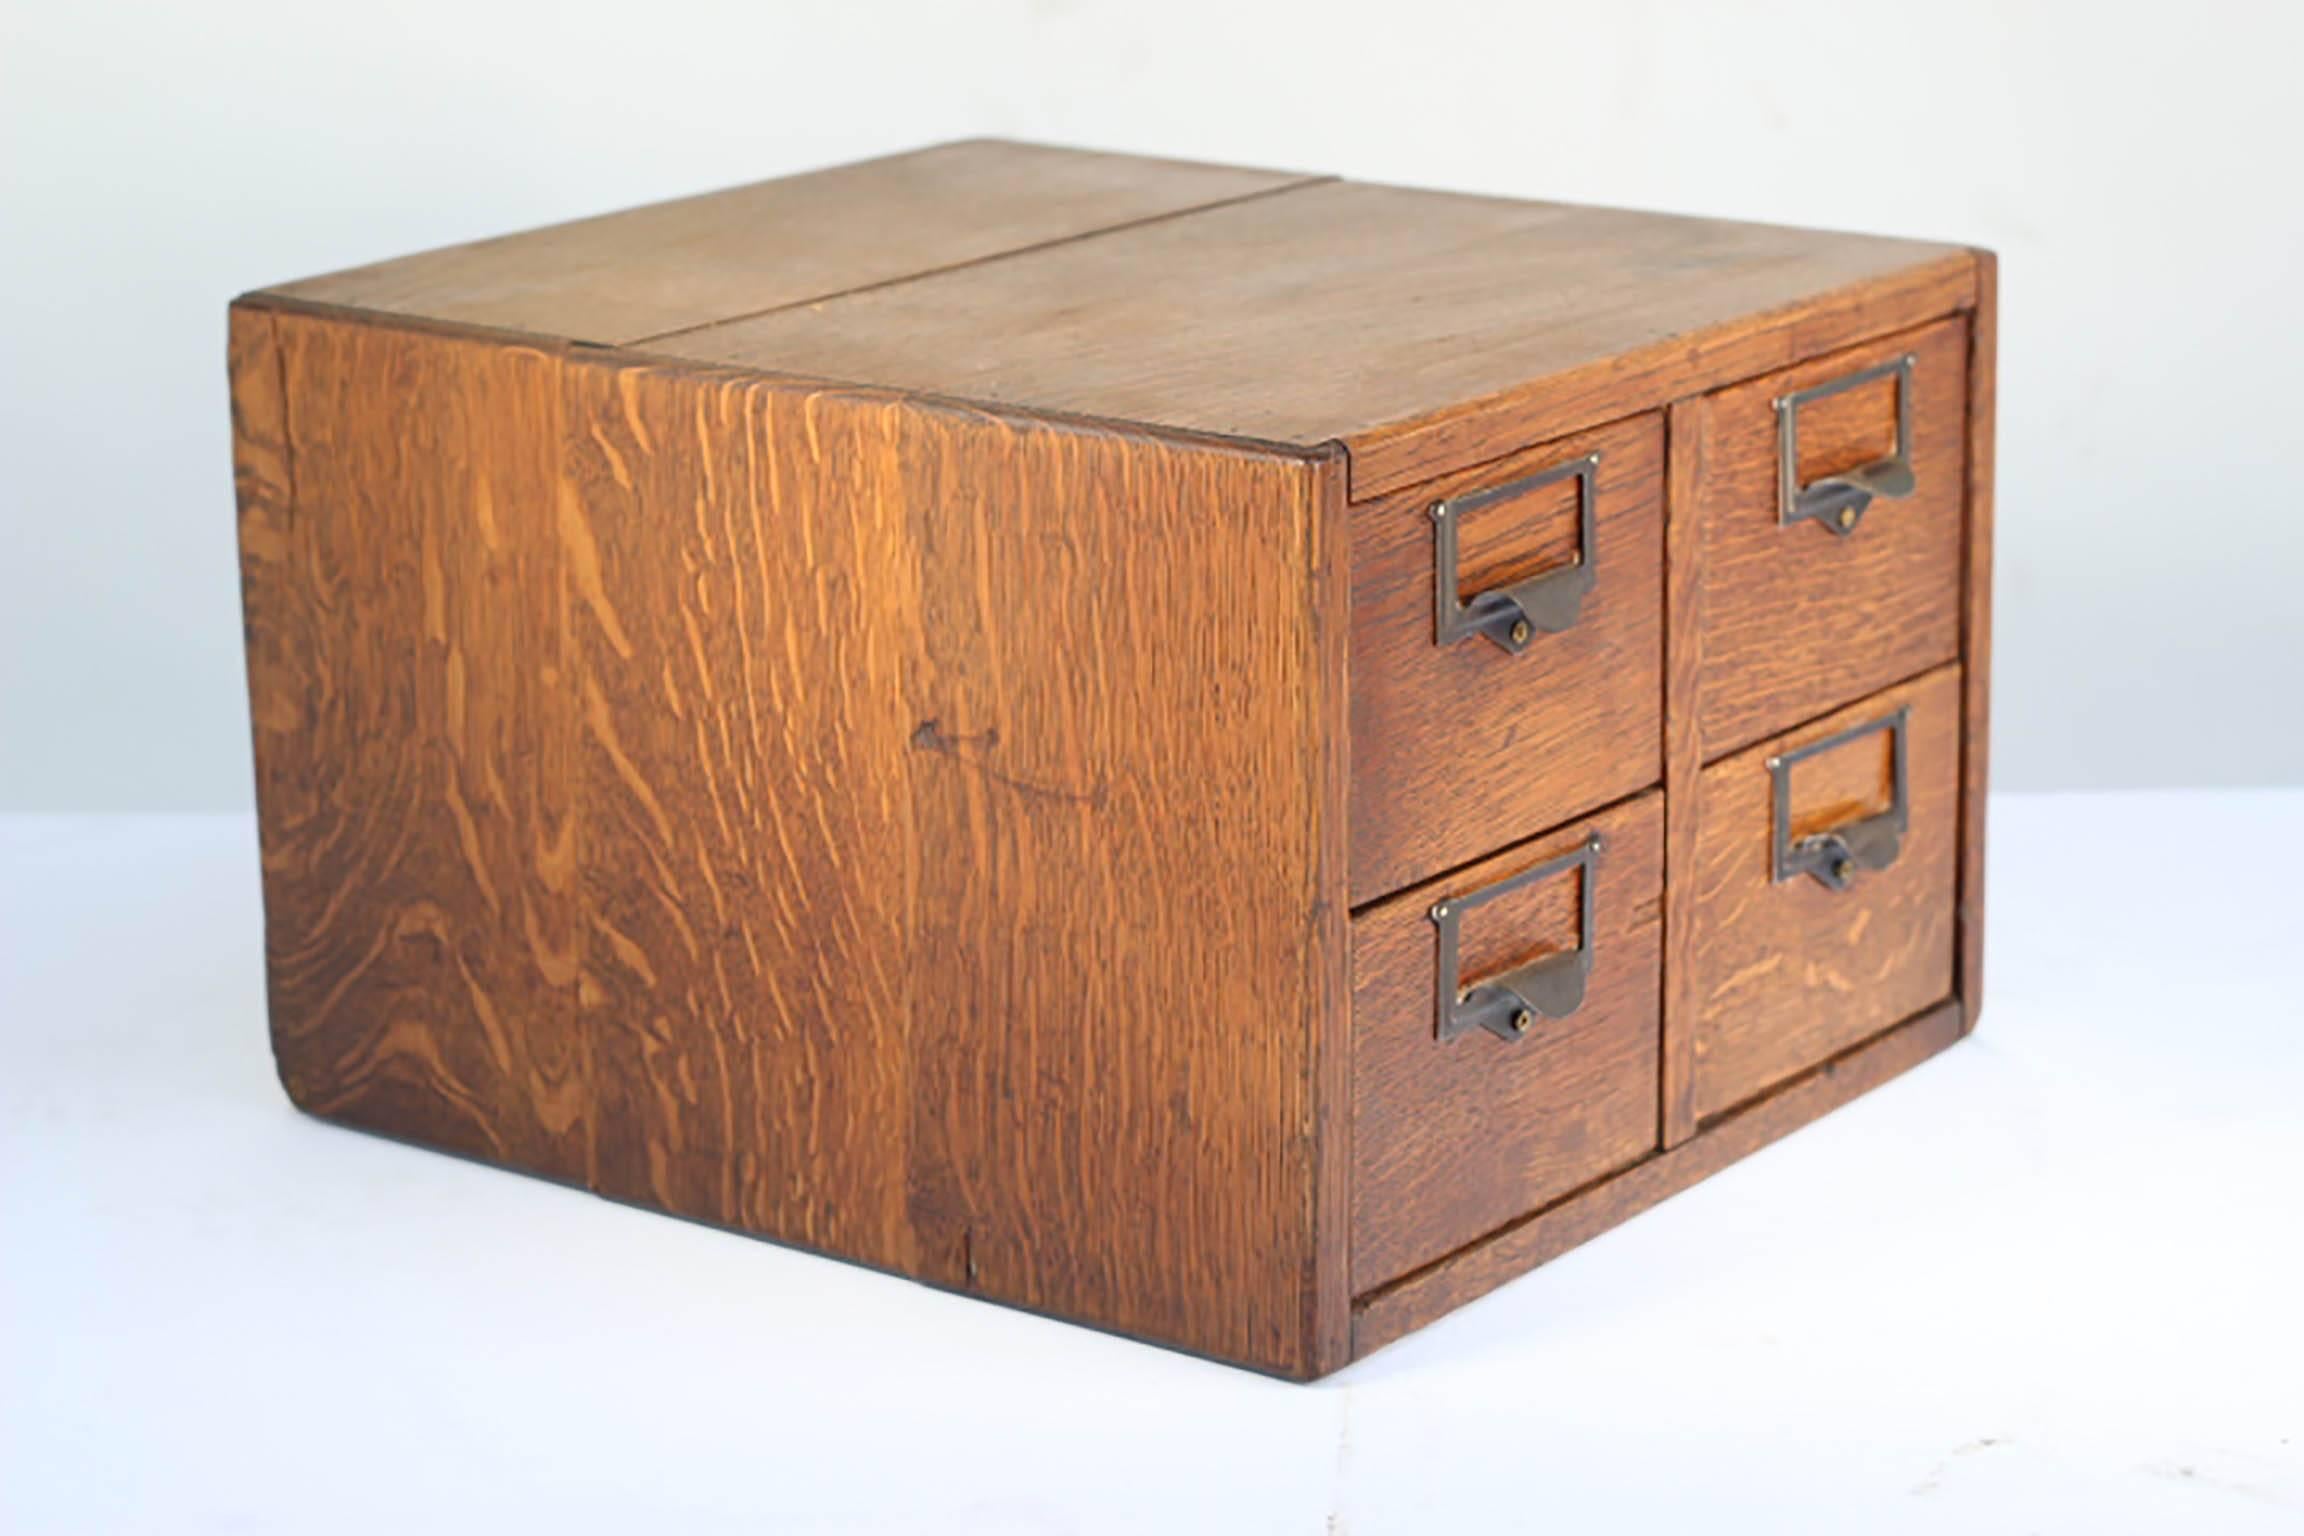 Early 20th century four-drawer index card file cabinet with brass handles.